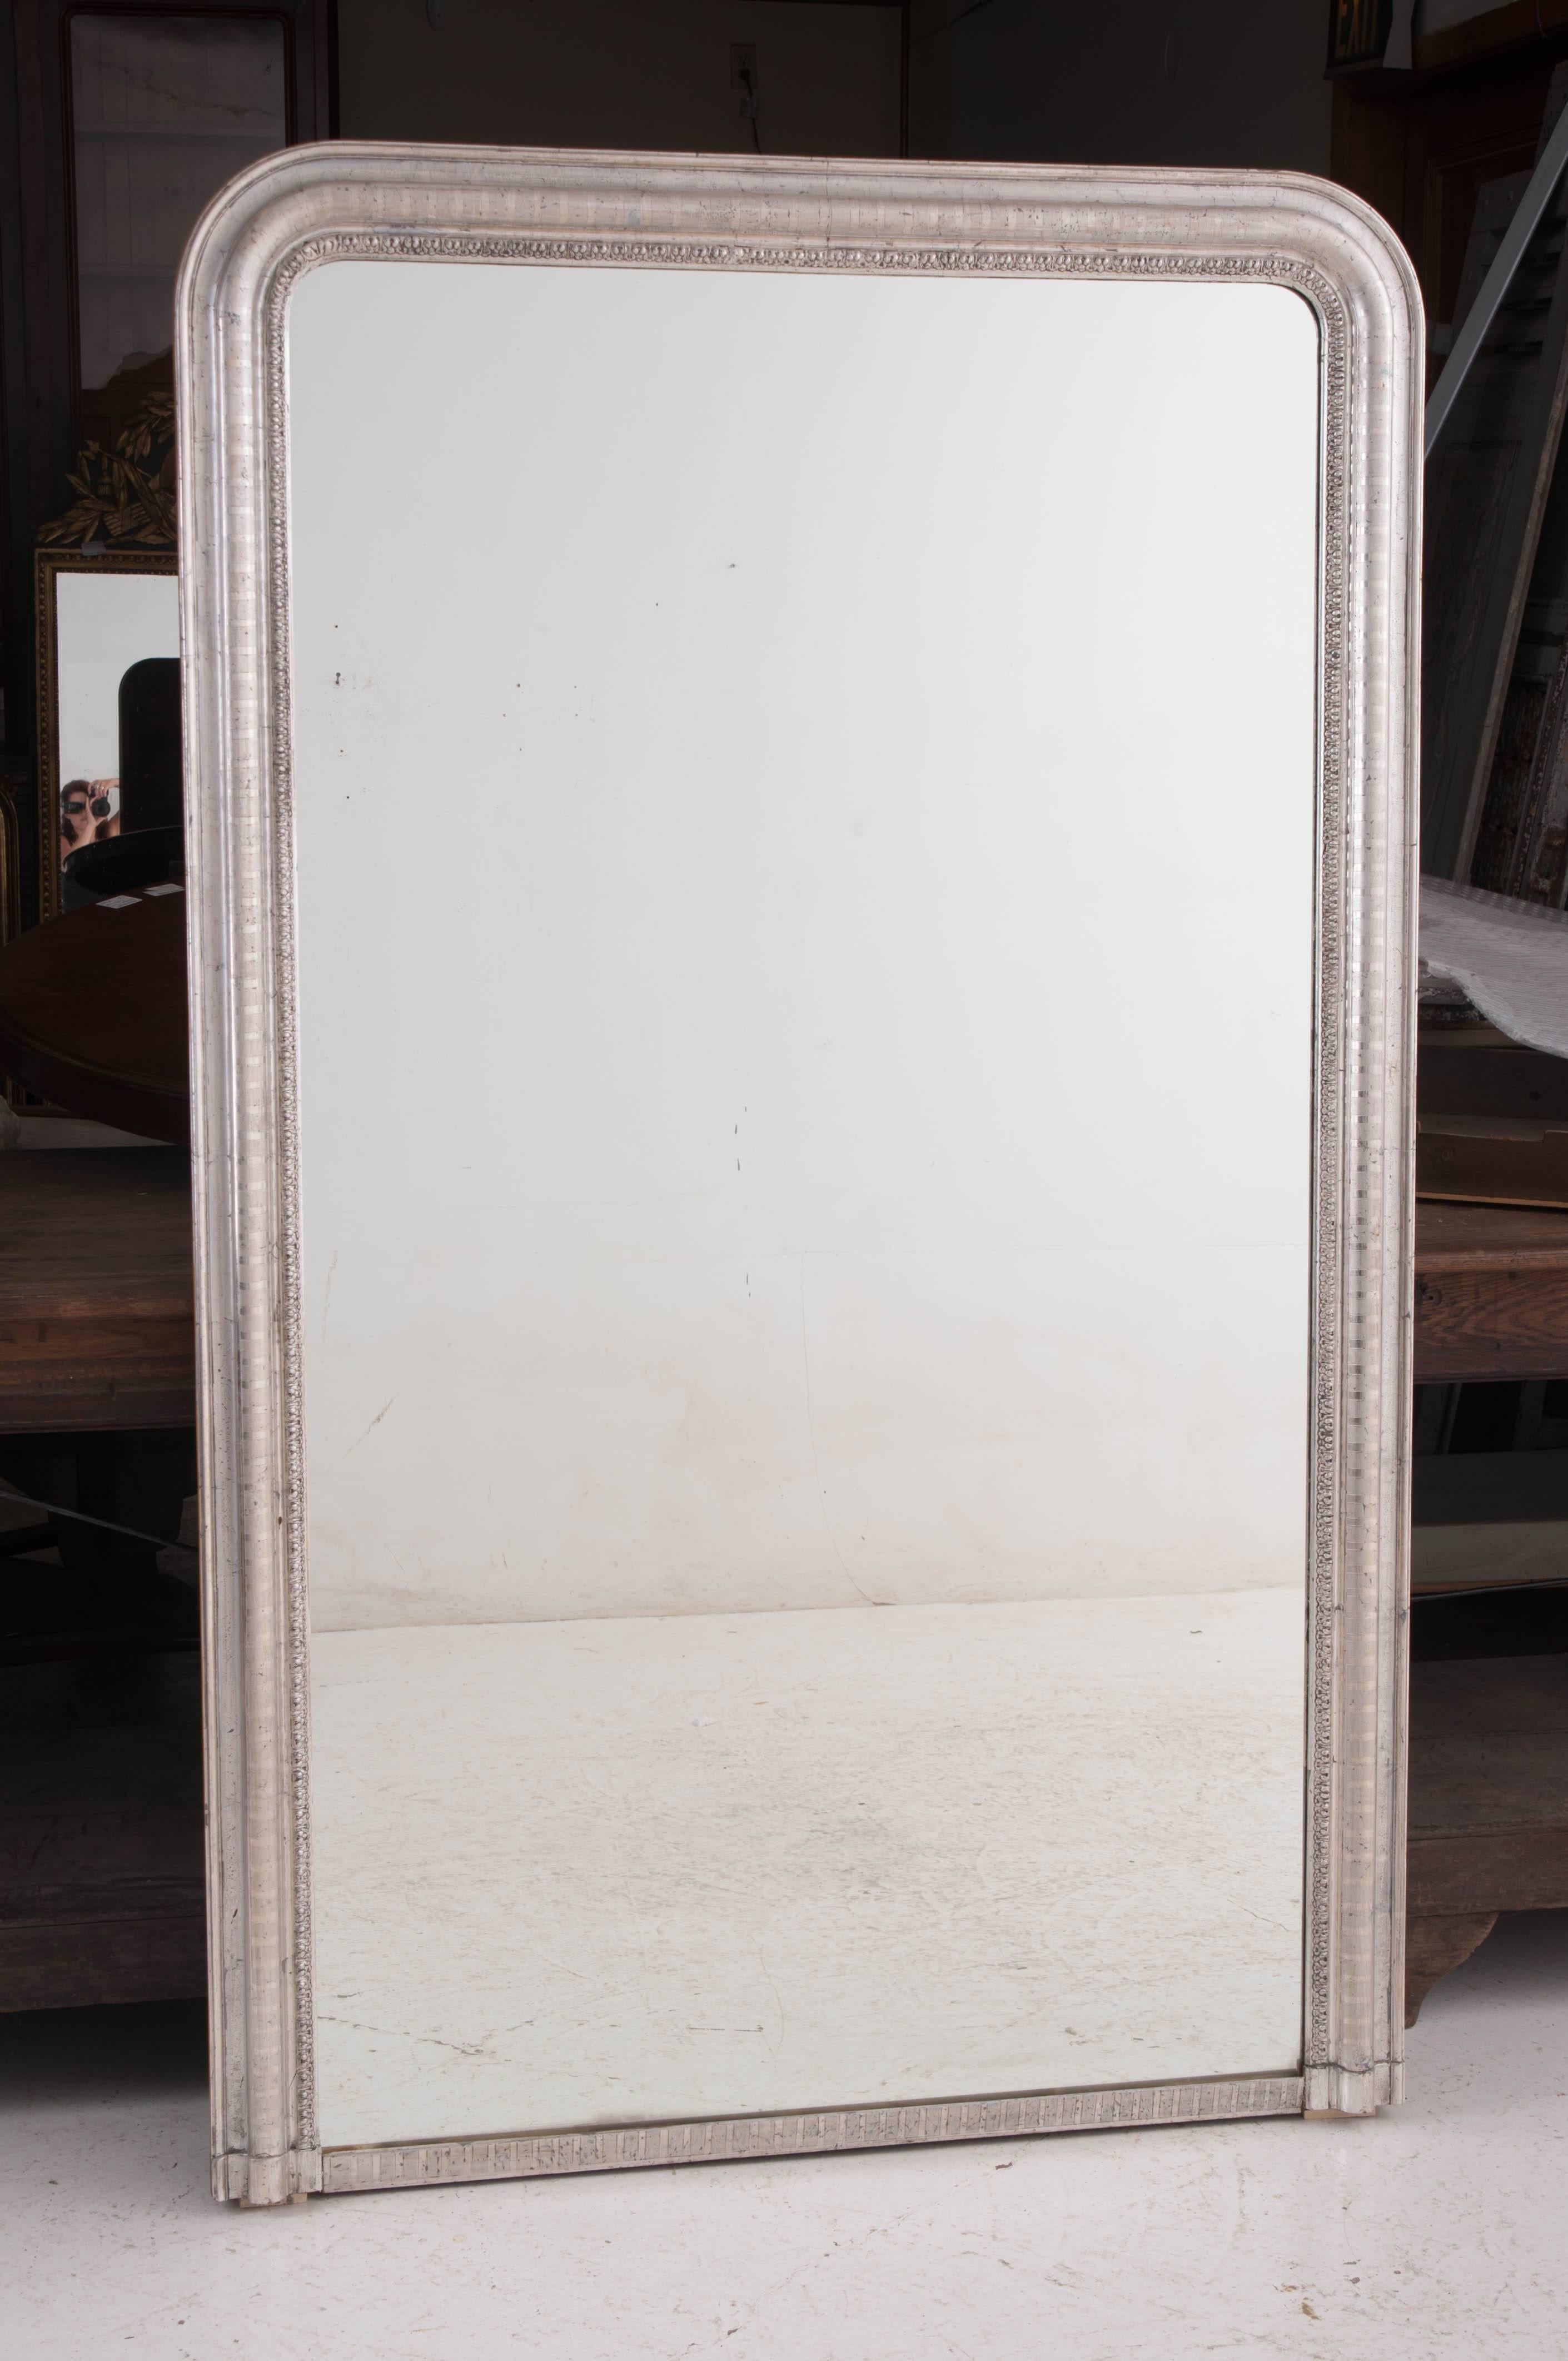 A tall, spectacular Louis Philippe silver gilt mirror from 19th century, France. A thin stripe motif adds to the beauty of the lustrous silver gilt frame. The restrained, Classic design of the mirror ensures it will look wonderful in any room it